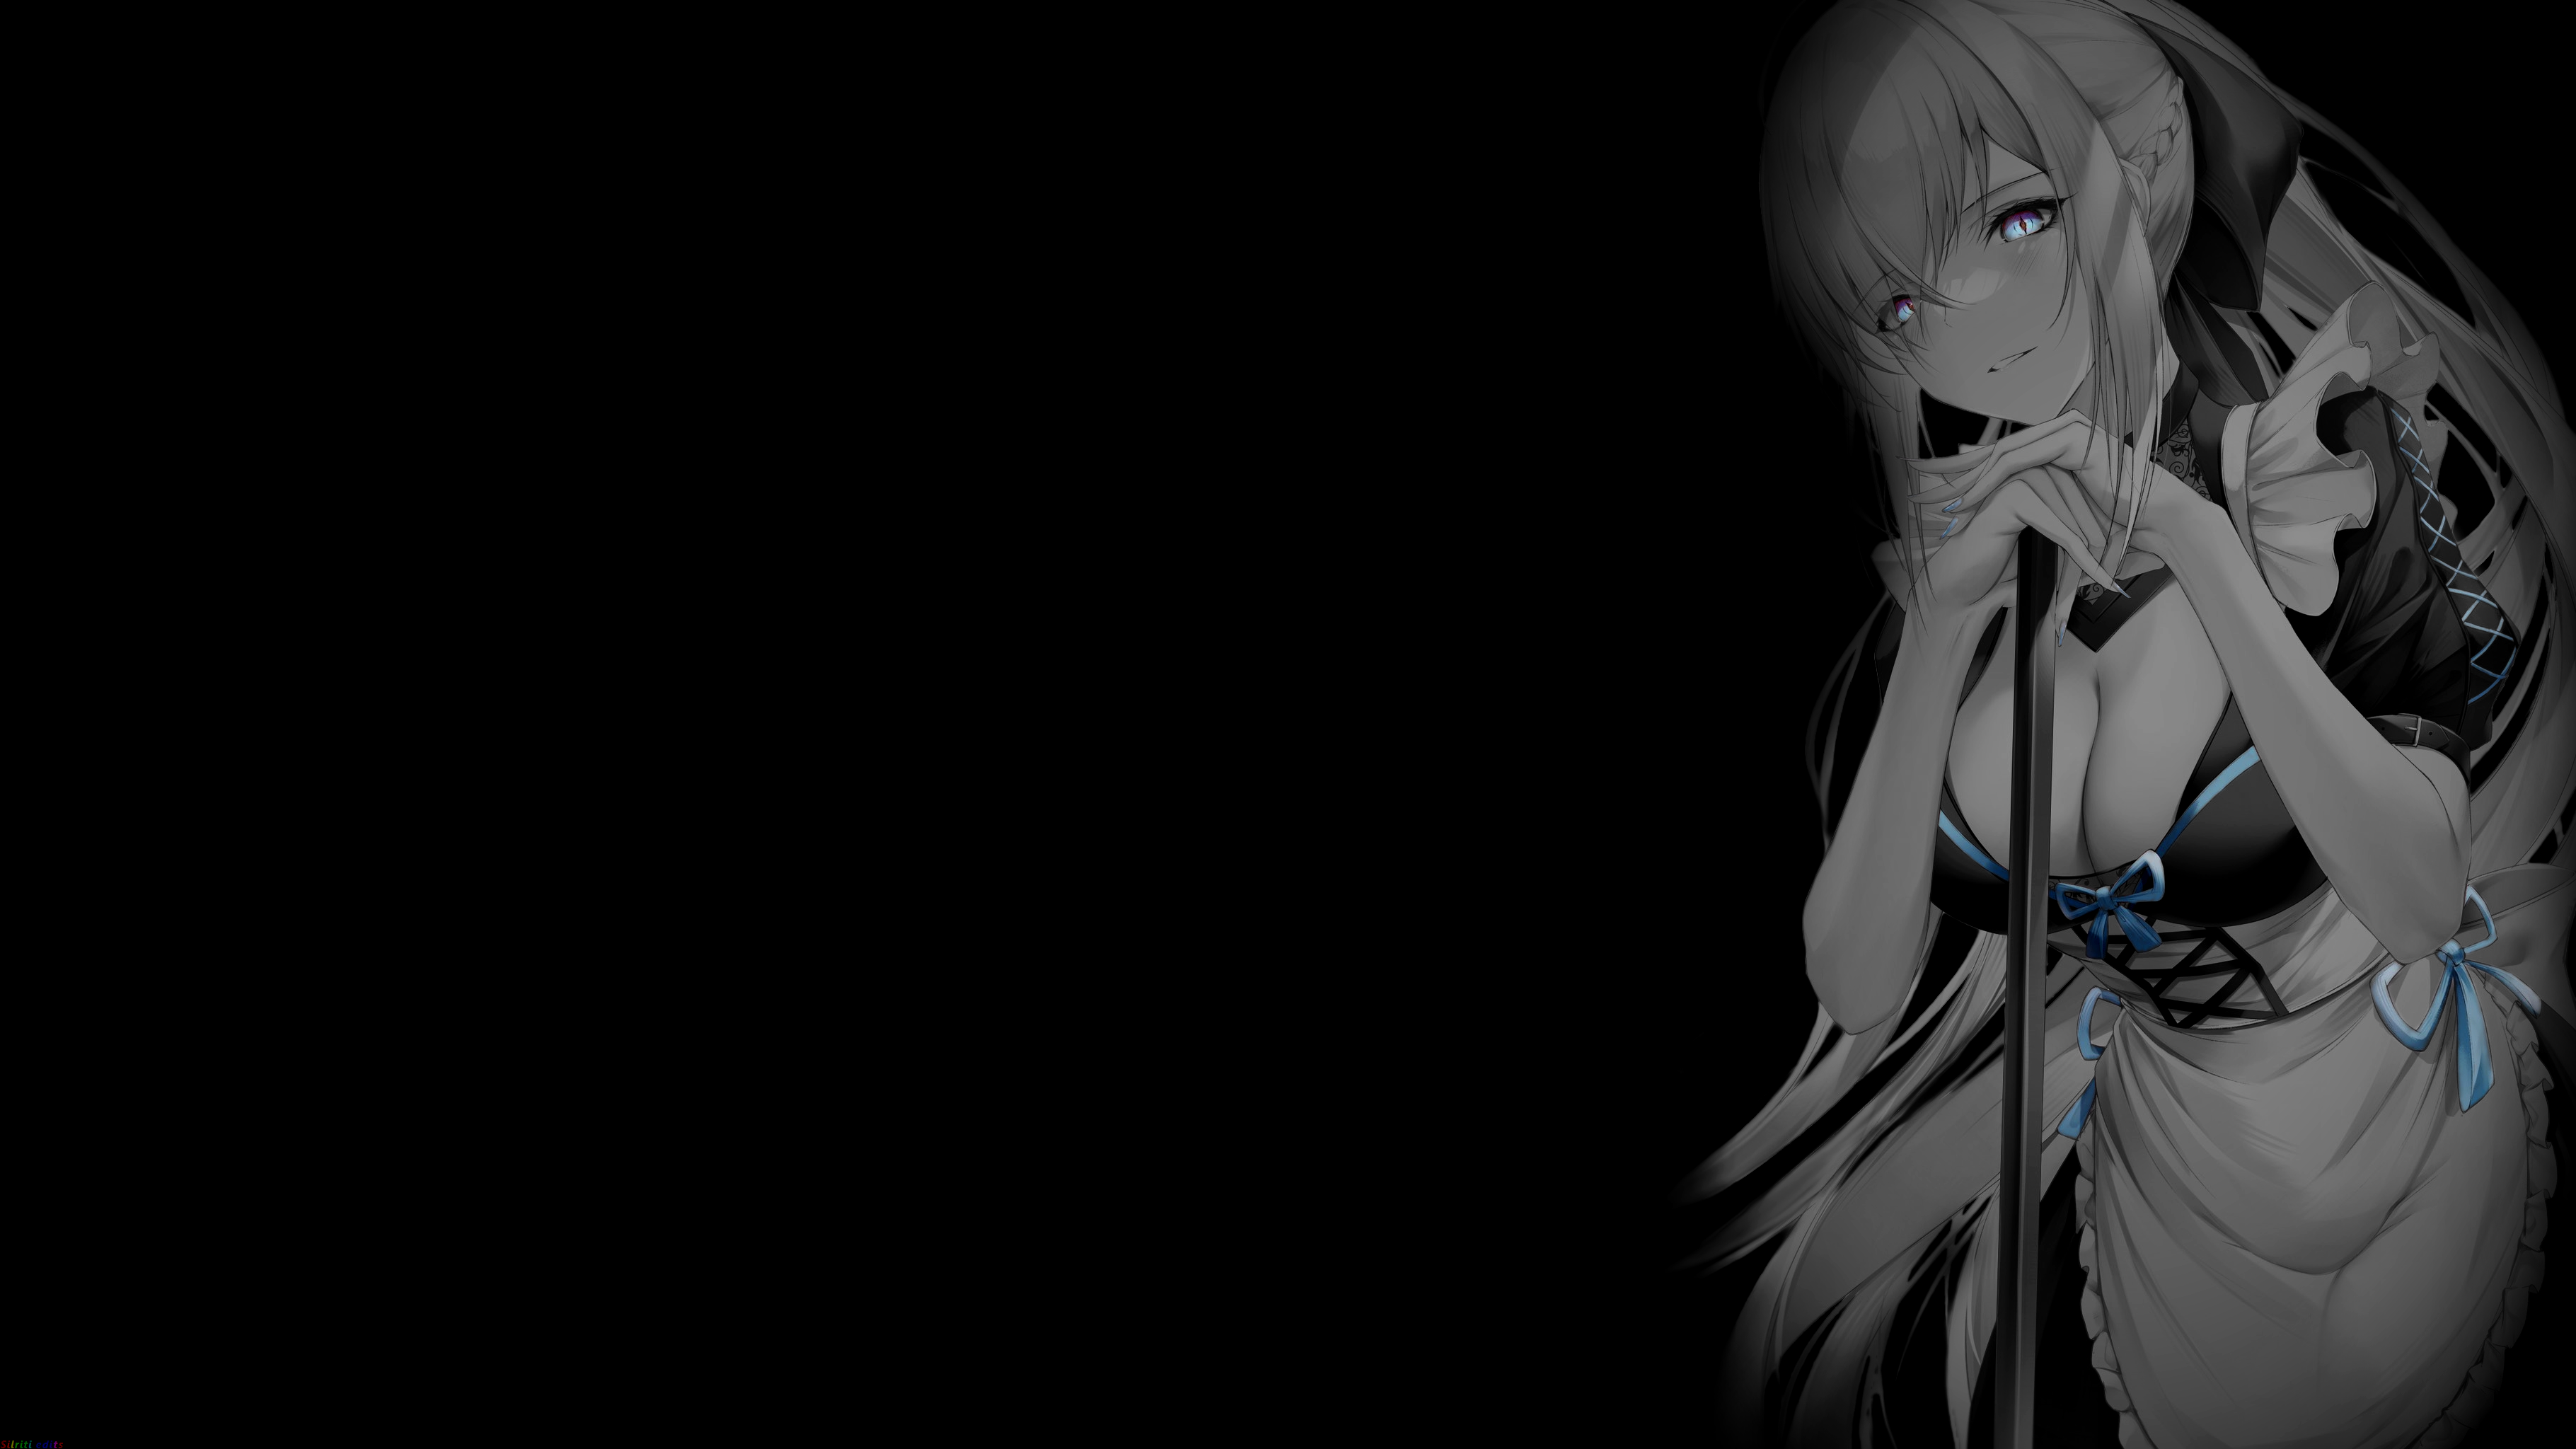 Anime 3641x2048 selective coloring black background dark background simple background anime girls cleavage maid maid outfit ponytail big boobs